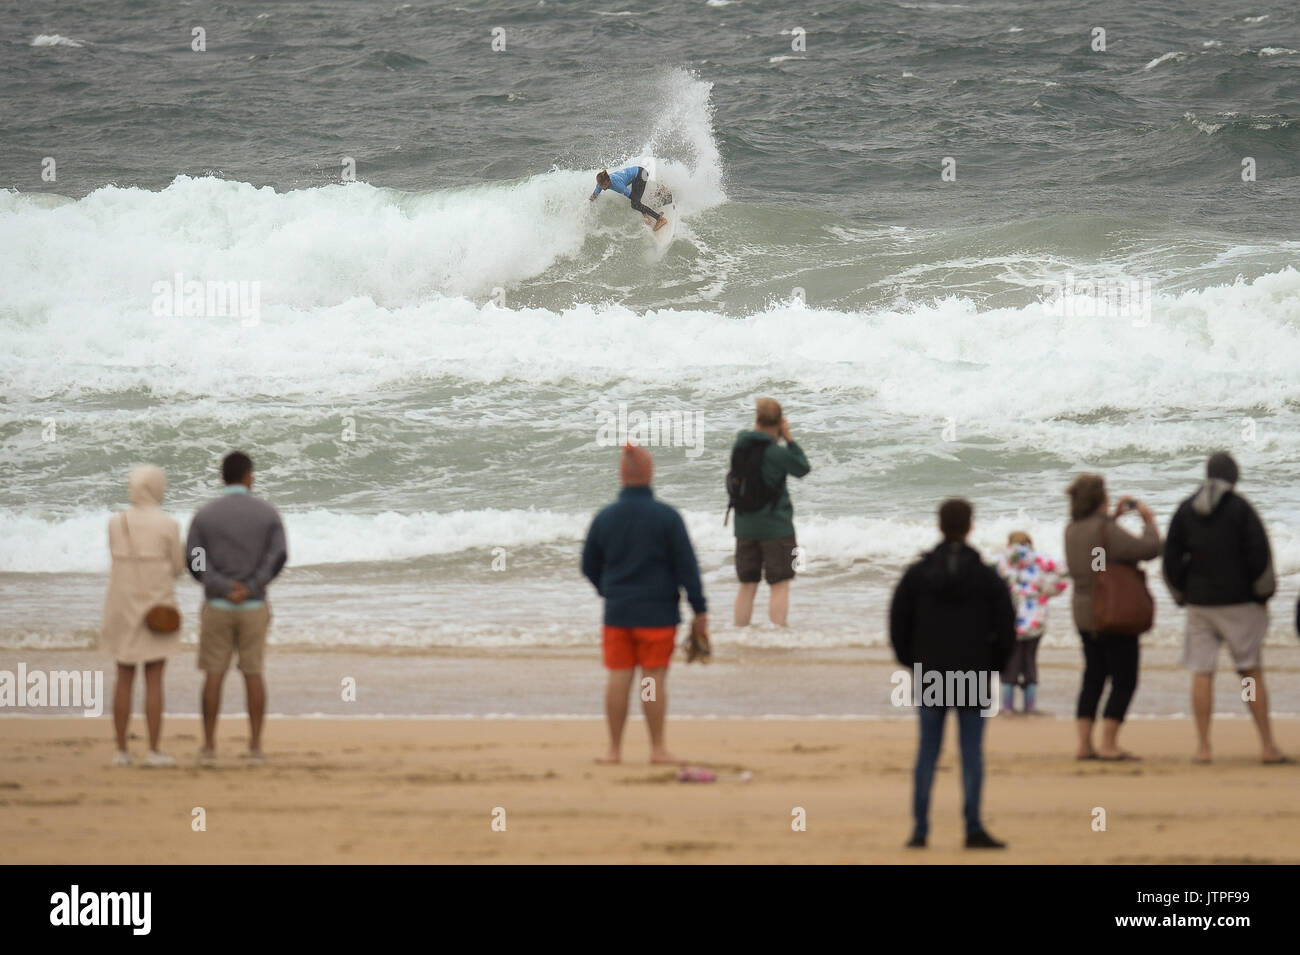 Spectators watch surfers during heats for the World Surf League Boardmasters Quicksilver Open competition at Fistral beach in Newquay, Cornwall. Stock Photo